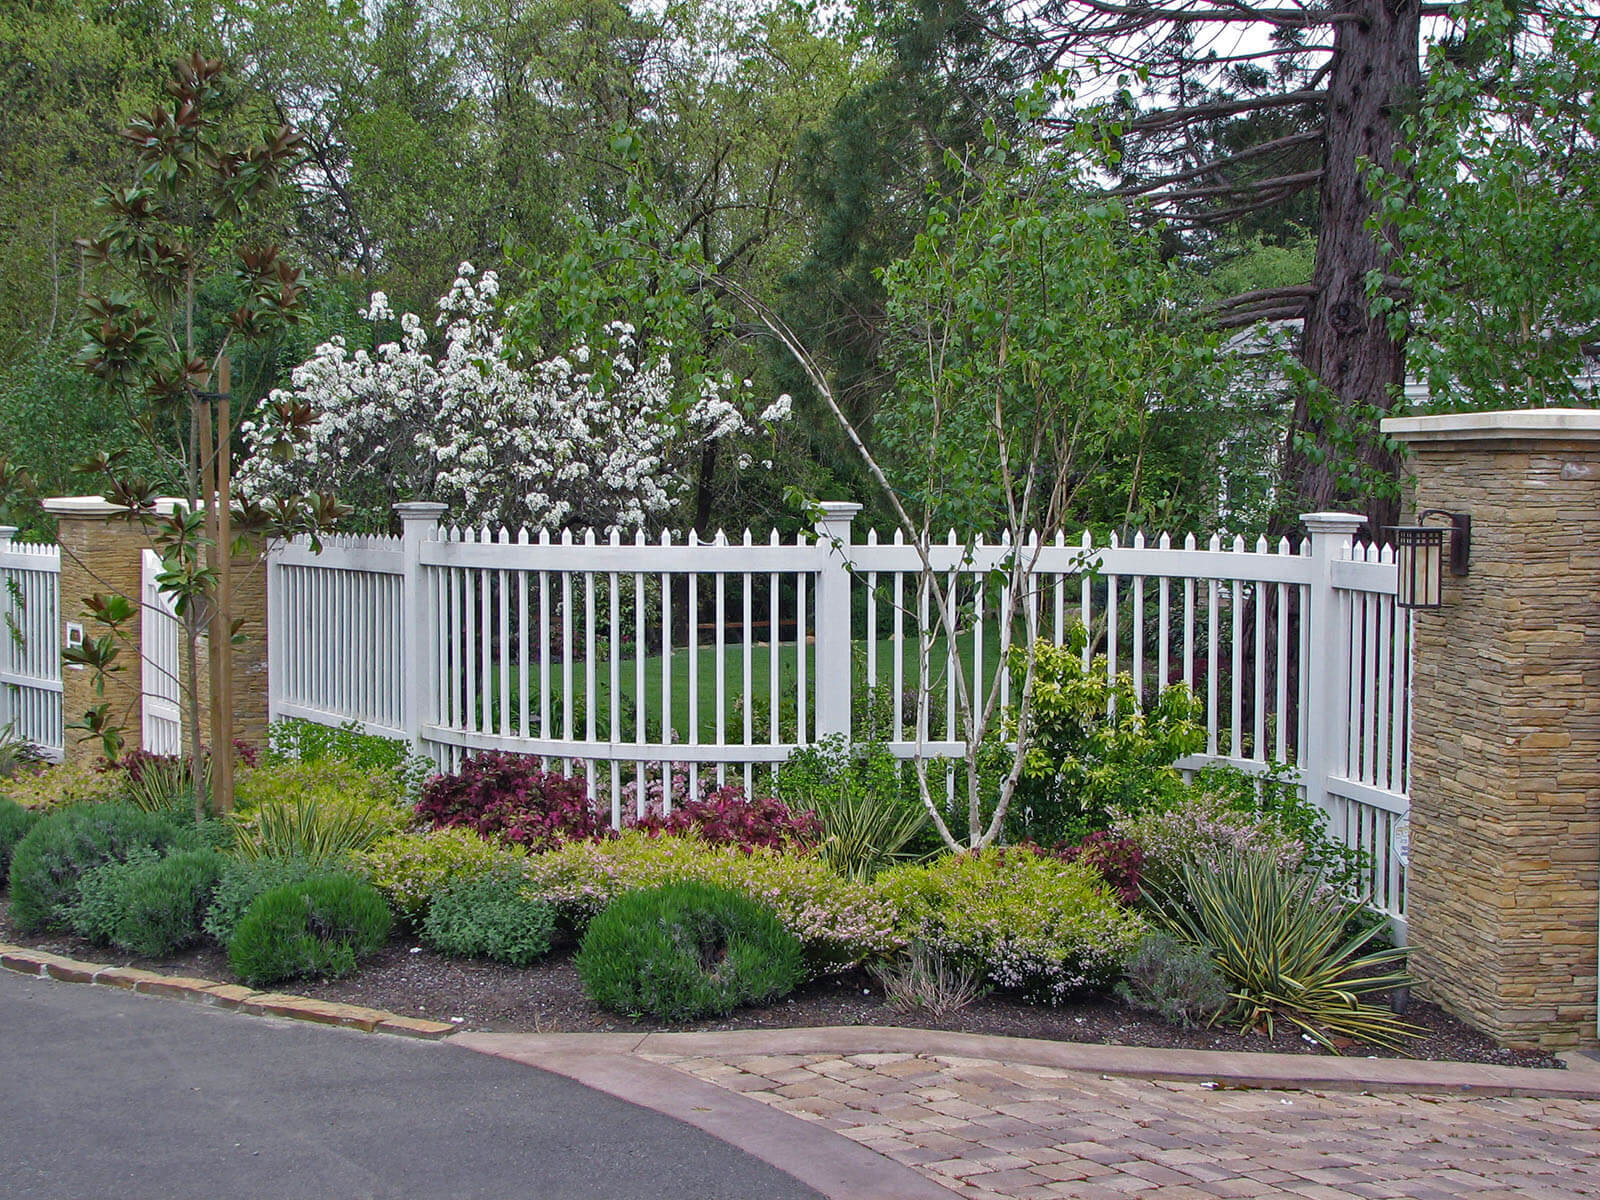 White thin picket fence leading between stone tile columns along side paved driveway with small flowering shrubs and plants